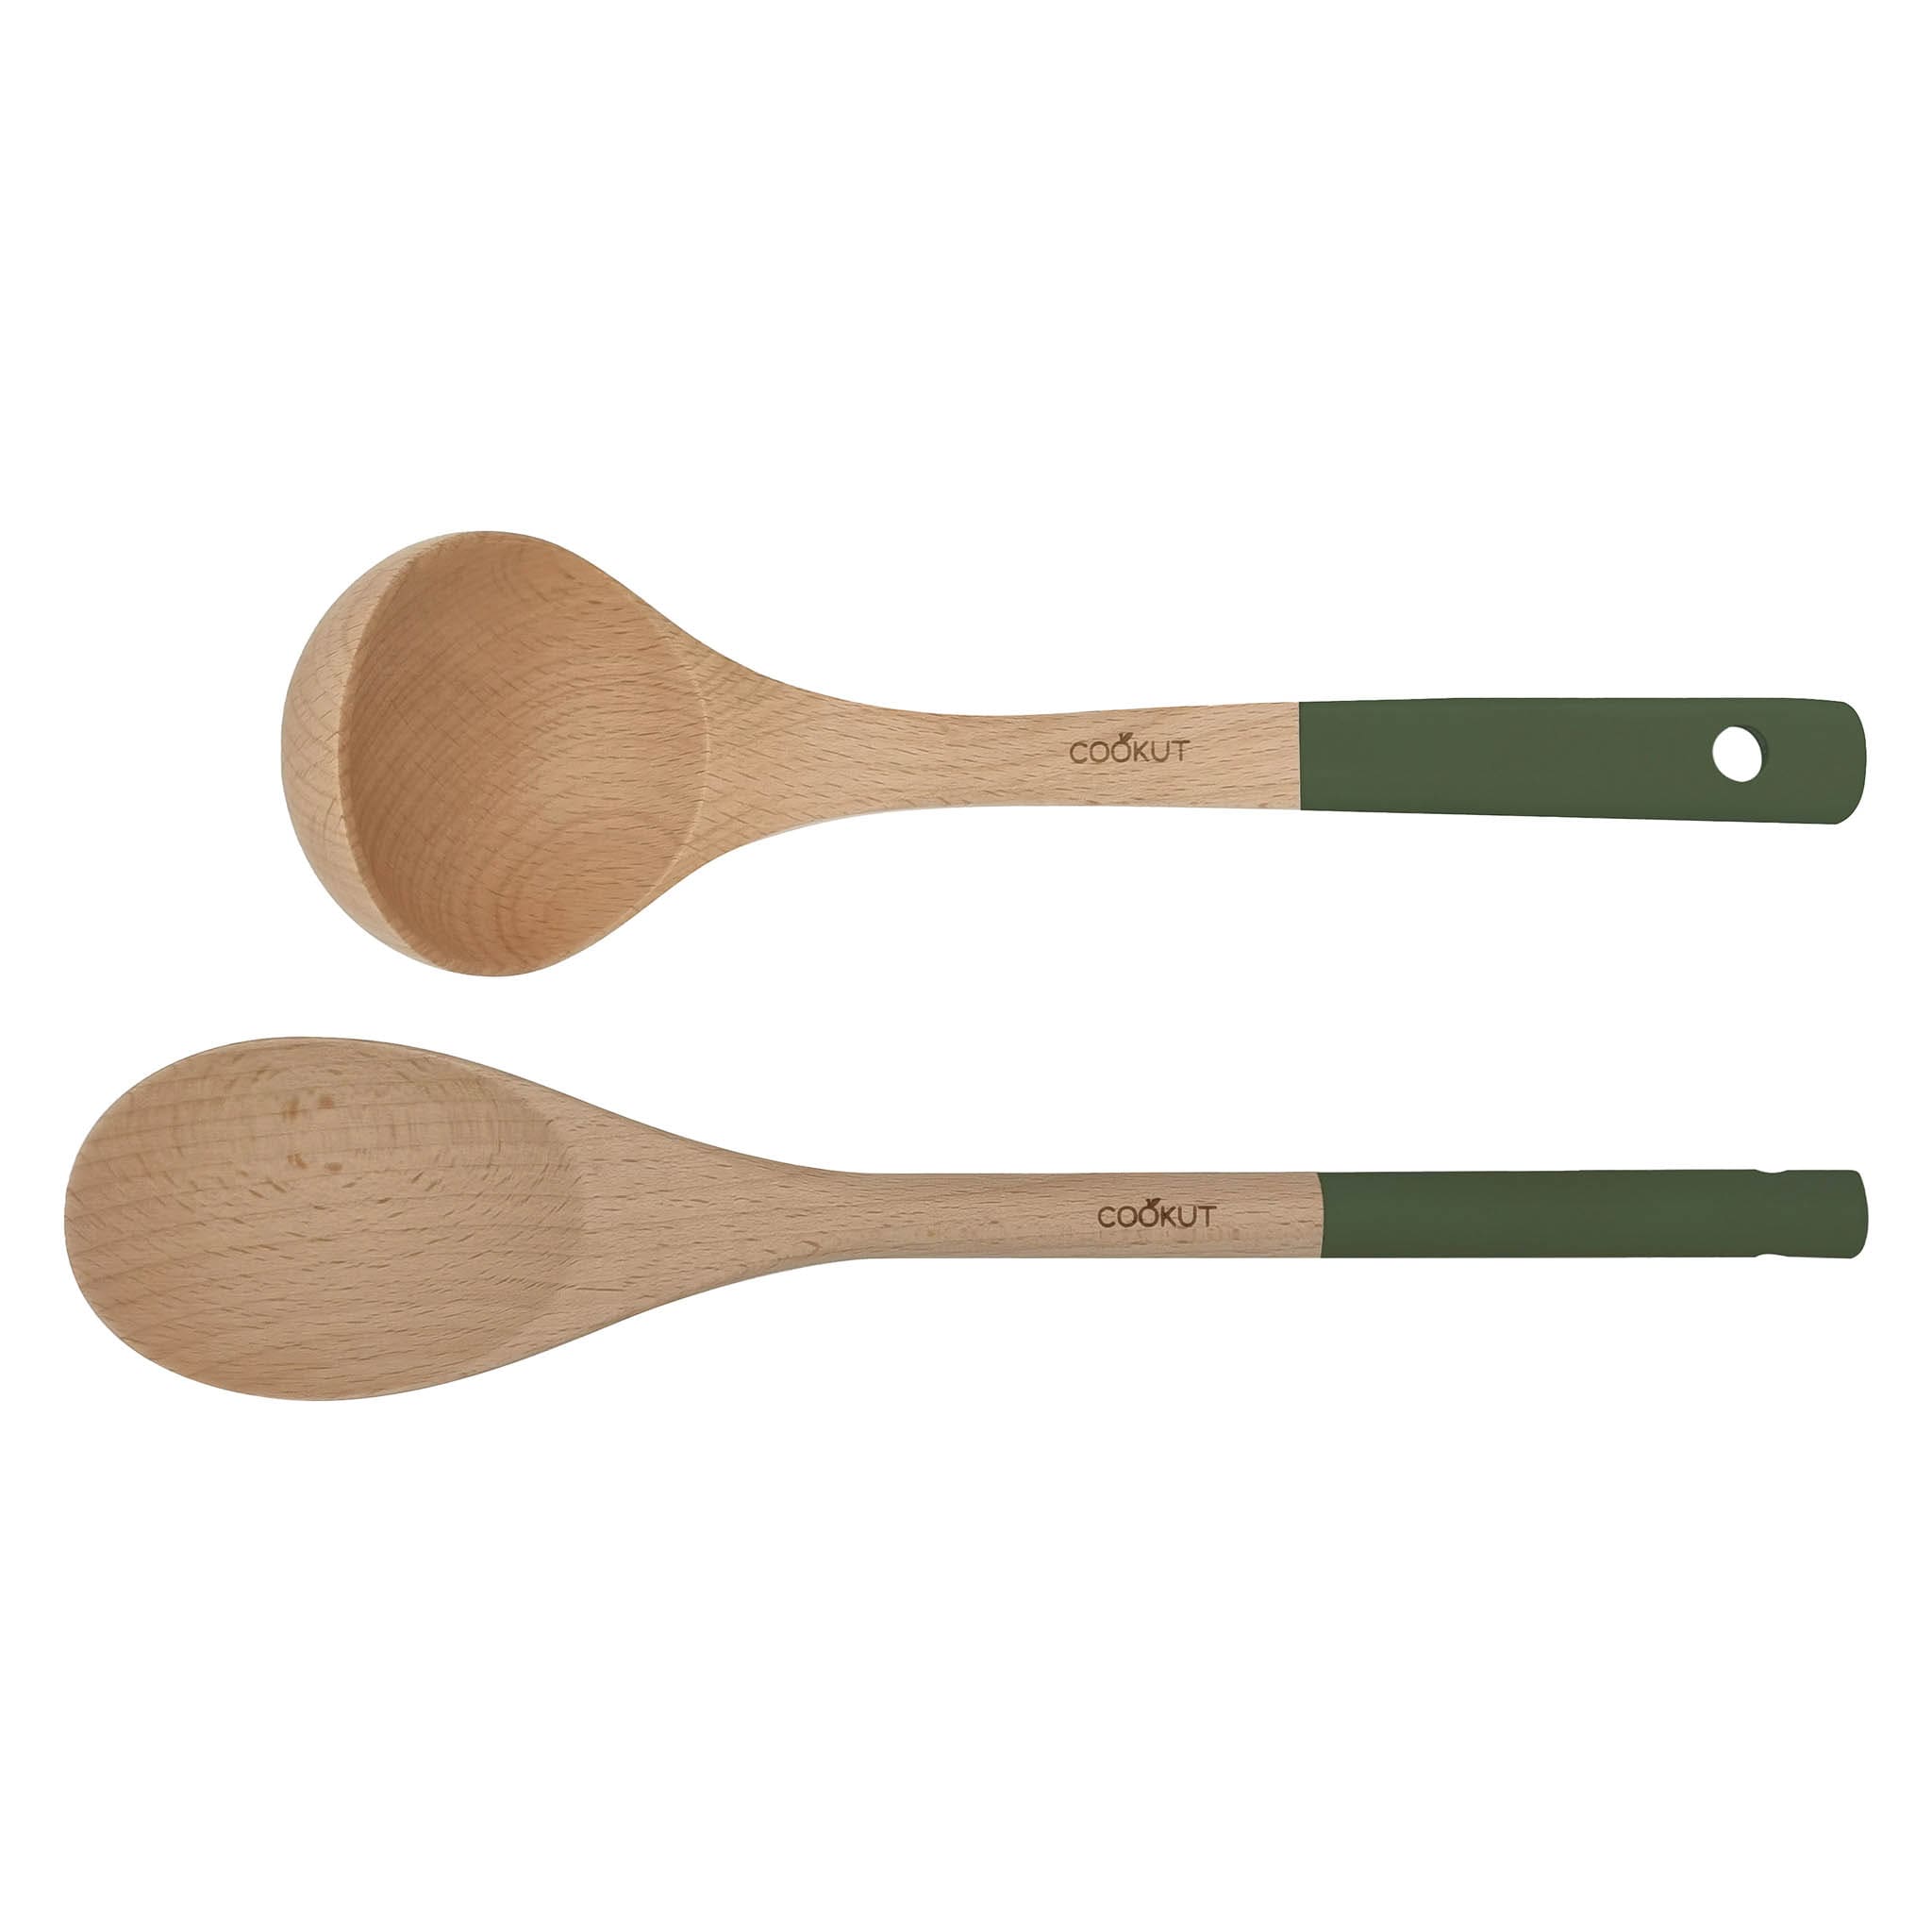 Cookut Wooden Spoon and Ladle Set, Green